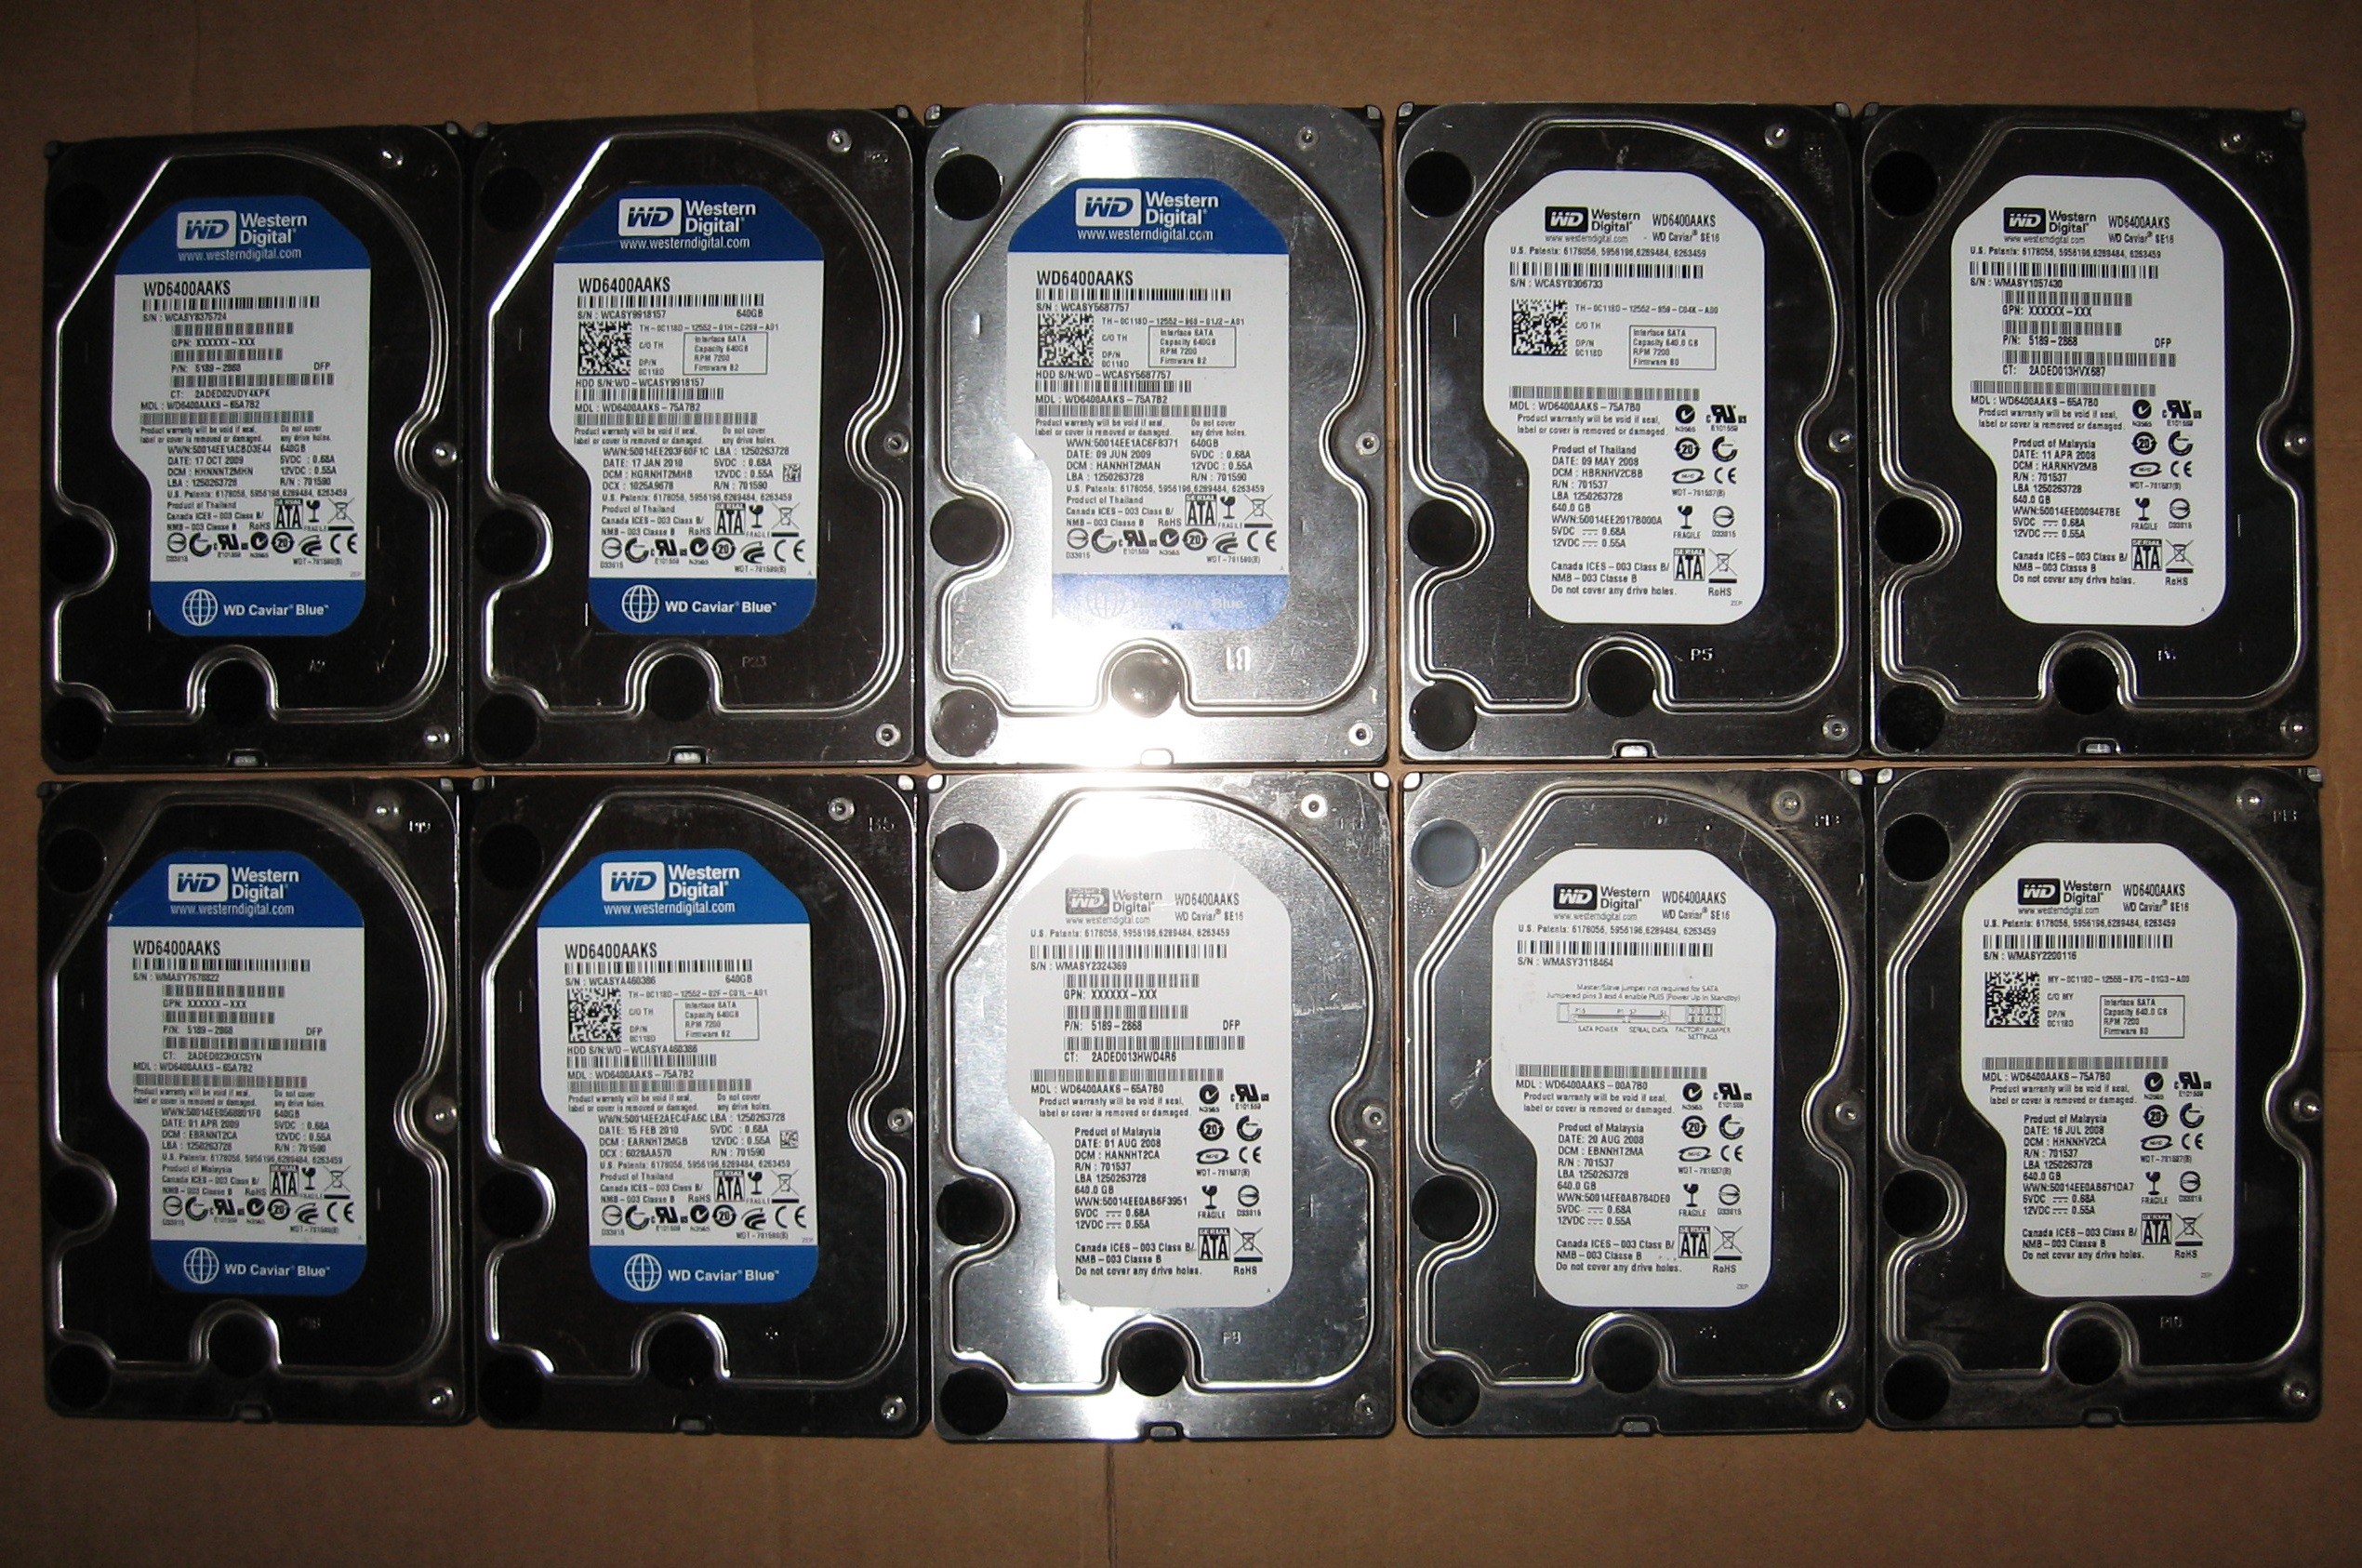 640GB Lot of 10 WD